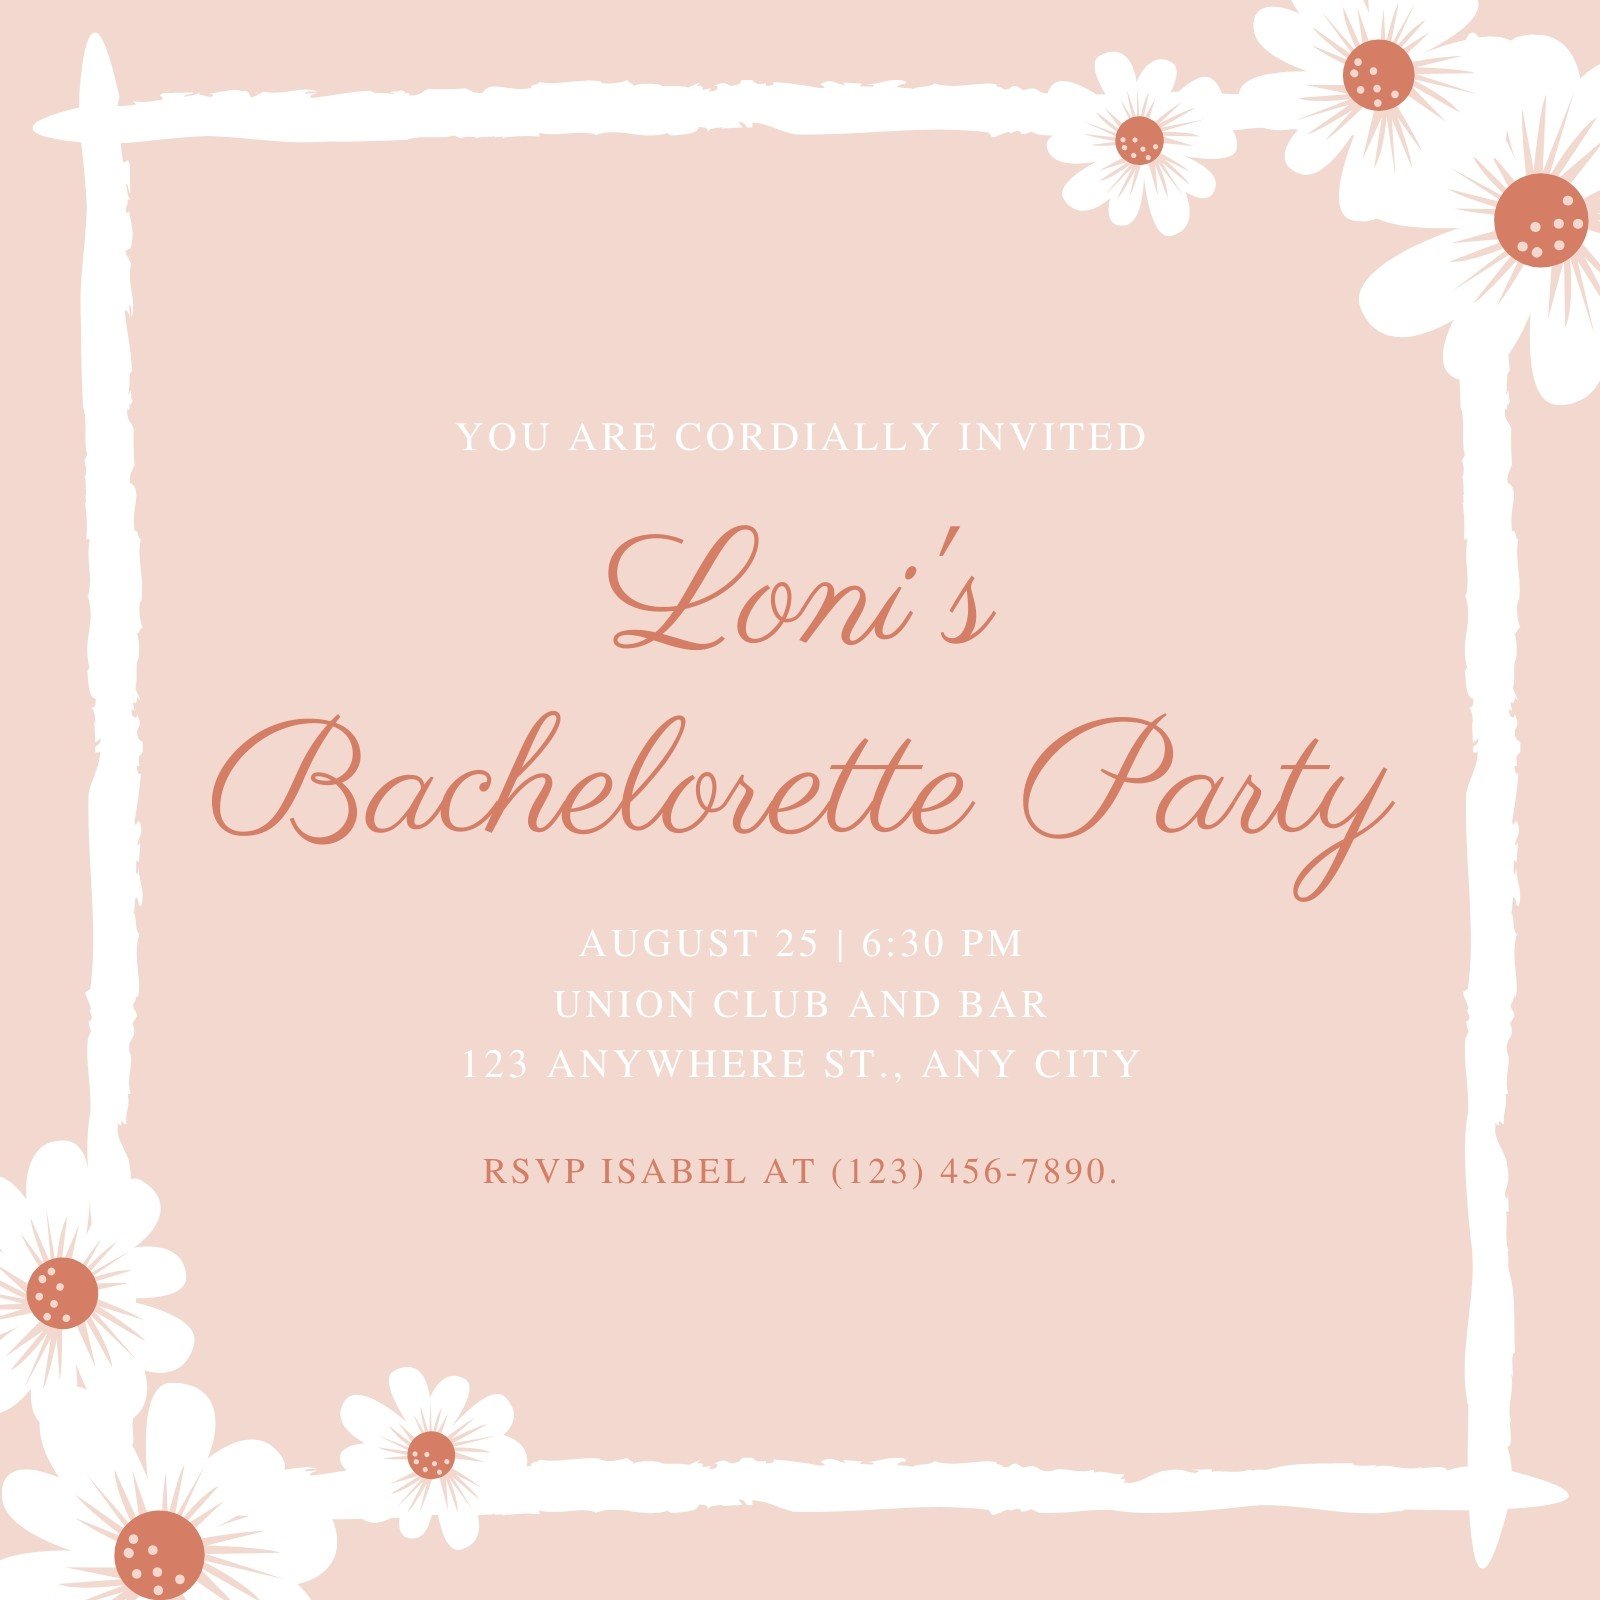 Gorgeous Lace Bridal Shower or Bachelorette Party Printable Invitation -  Pink and Black